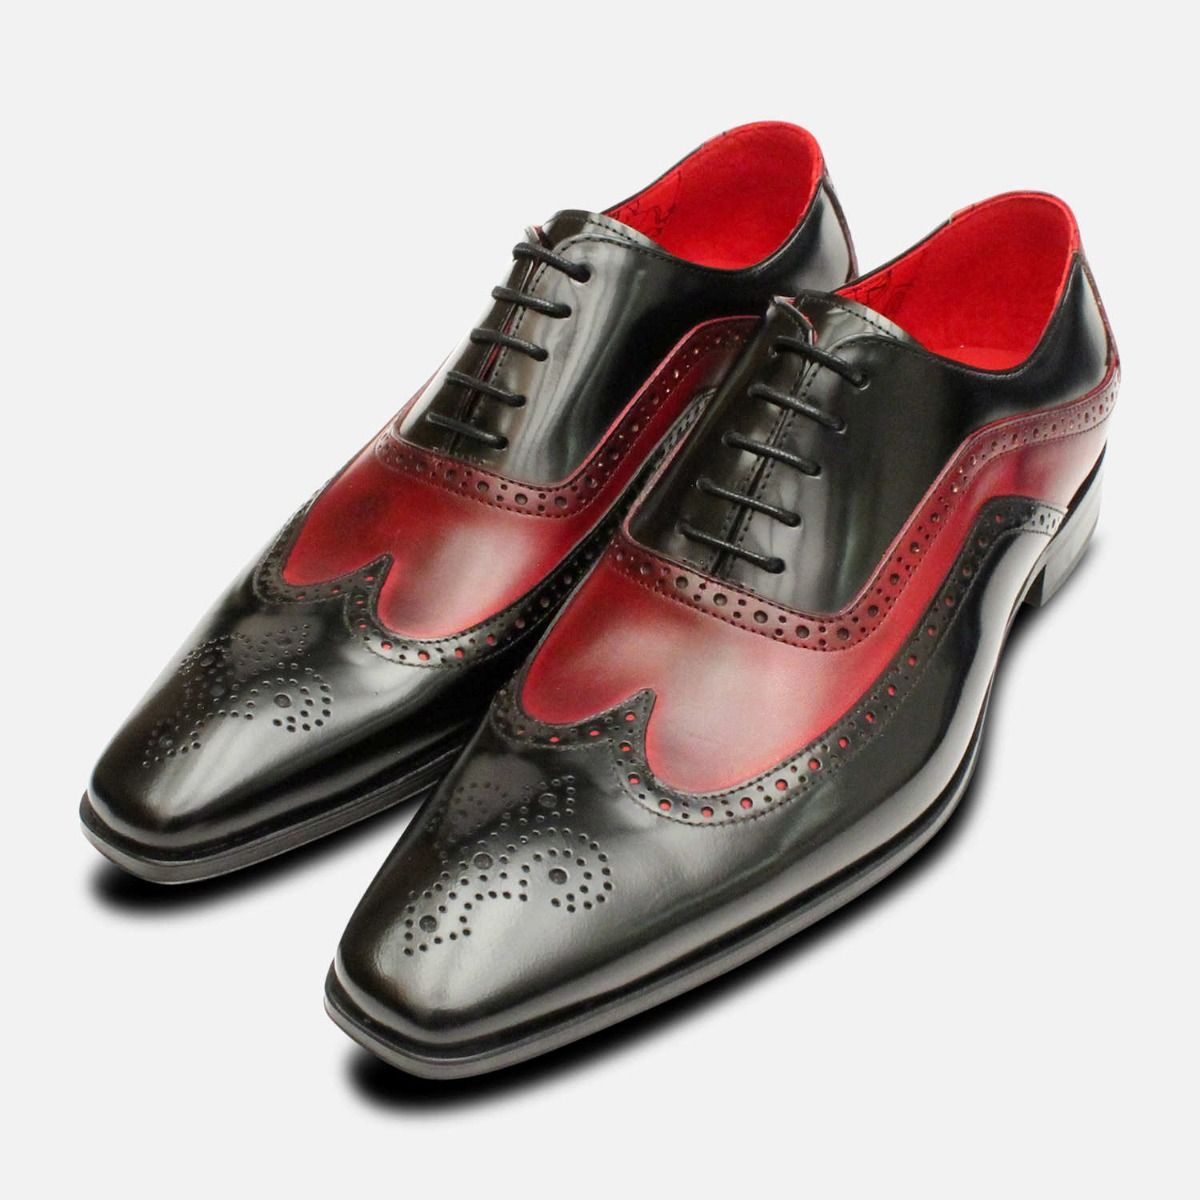 New Mens Patent Leather Brogues Black Maroon Smart Lace up Shoes 6 7 8 9 10 11 